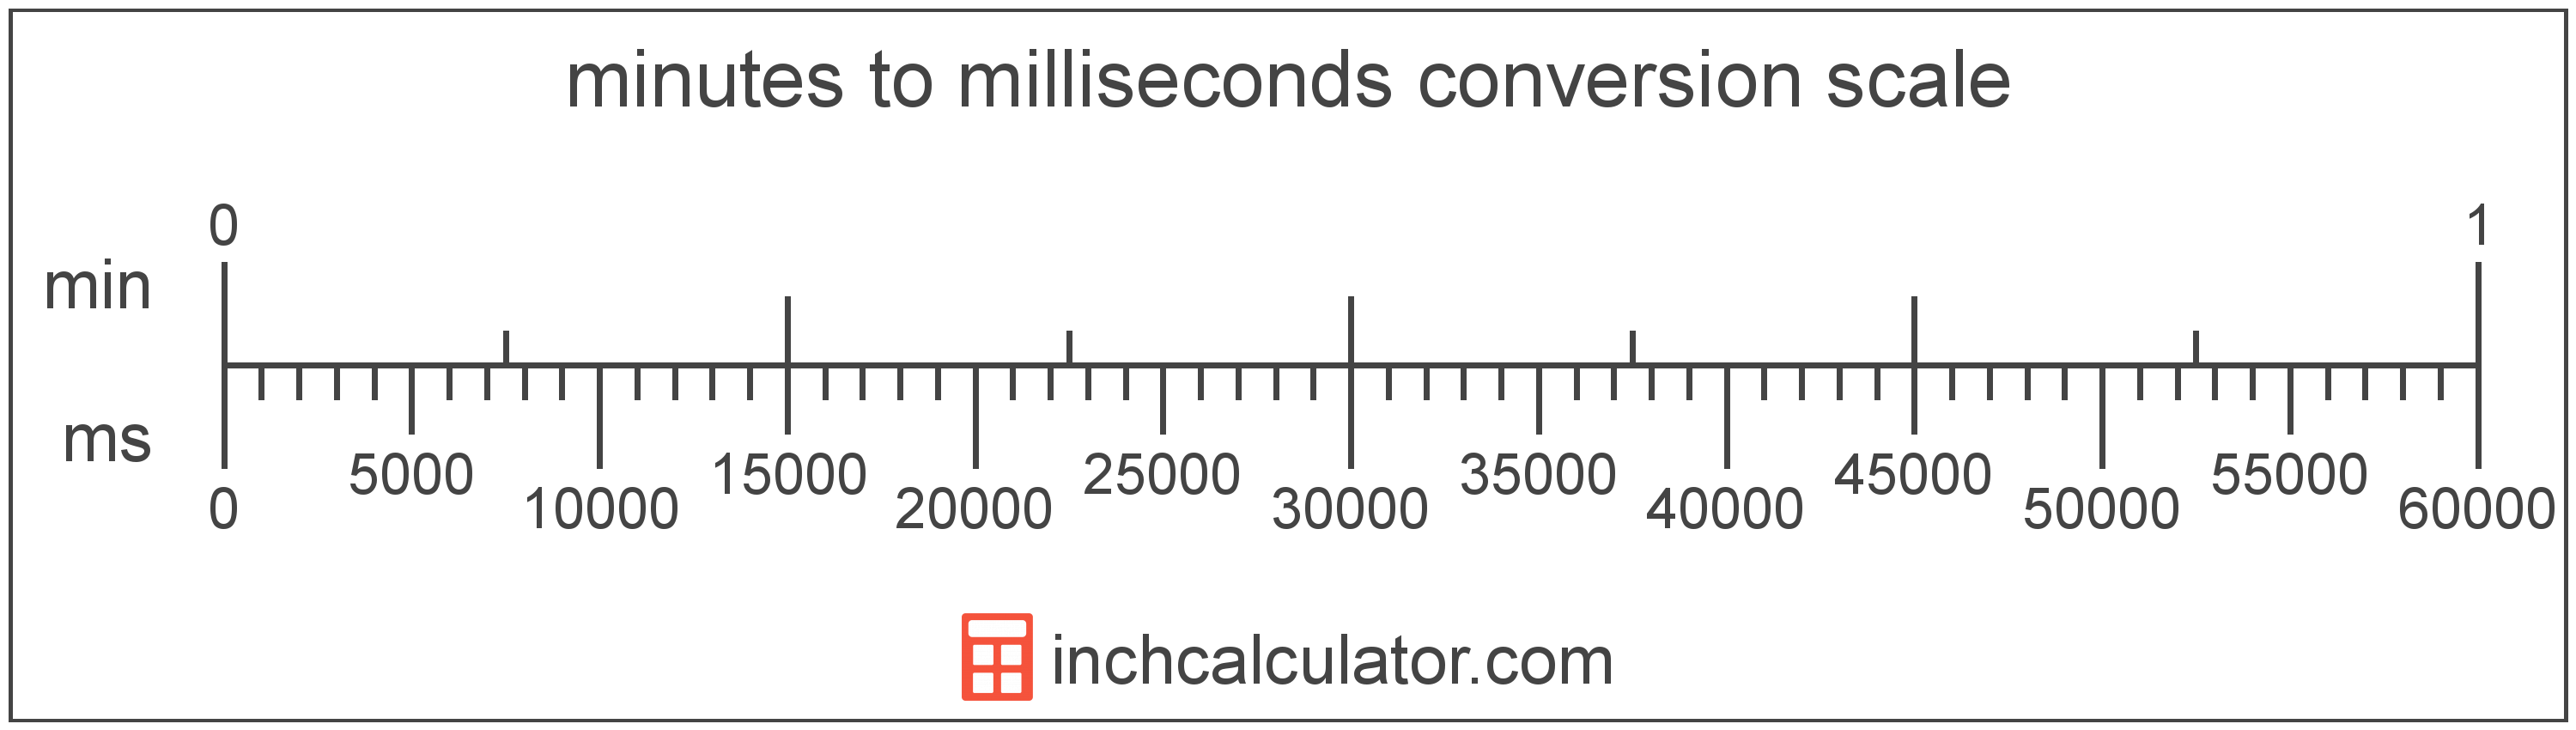 Minutes To Milliseconds Conversion Min To Ms Inch Calculator